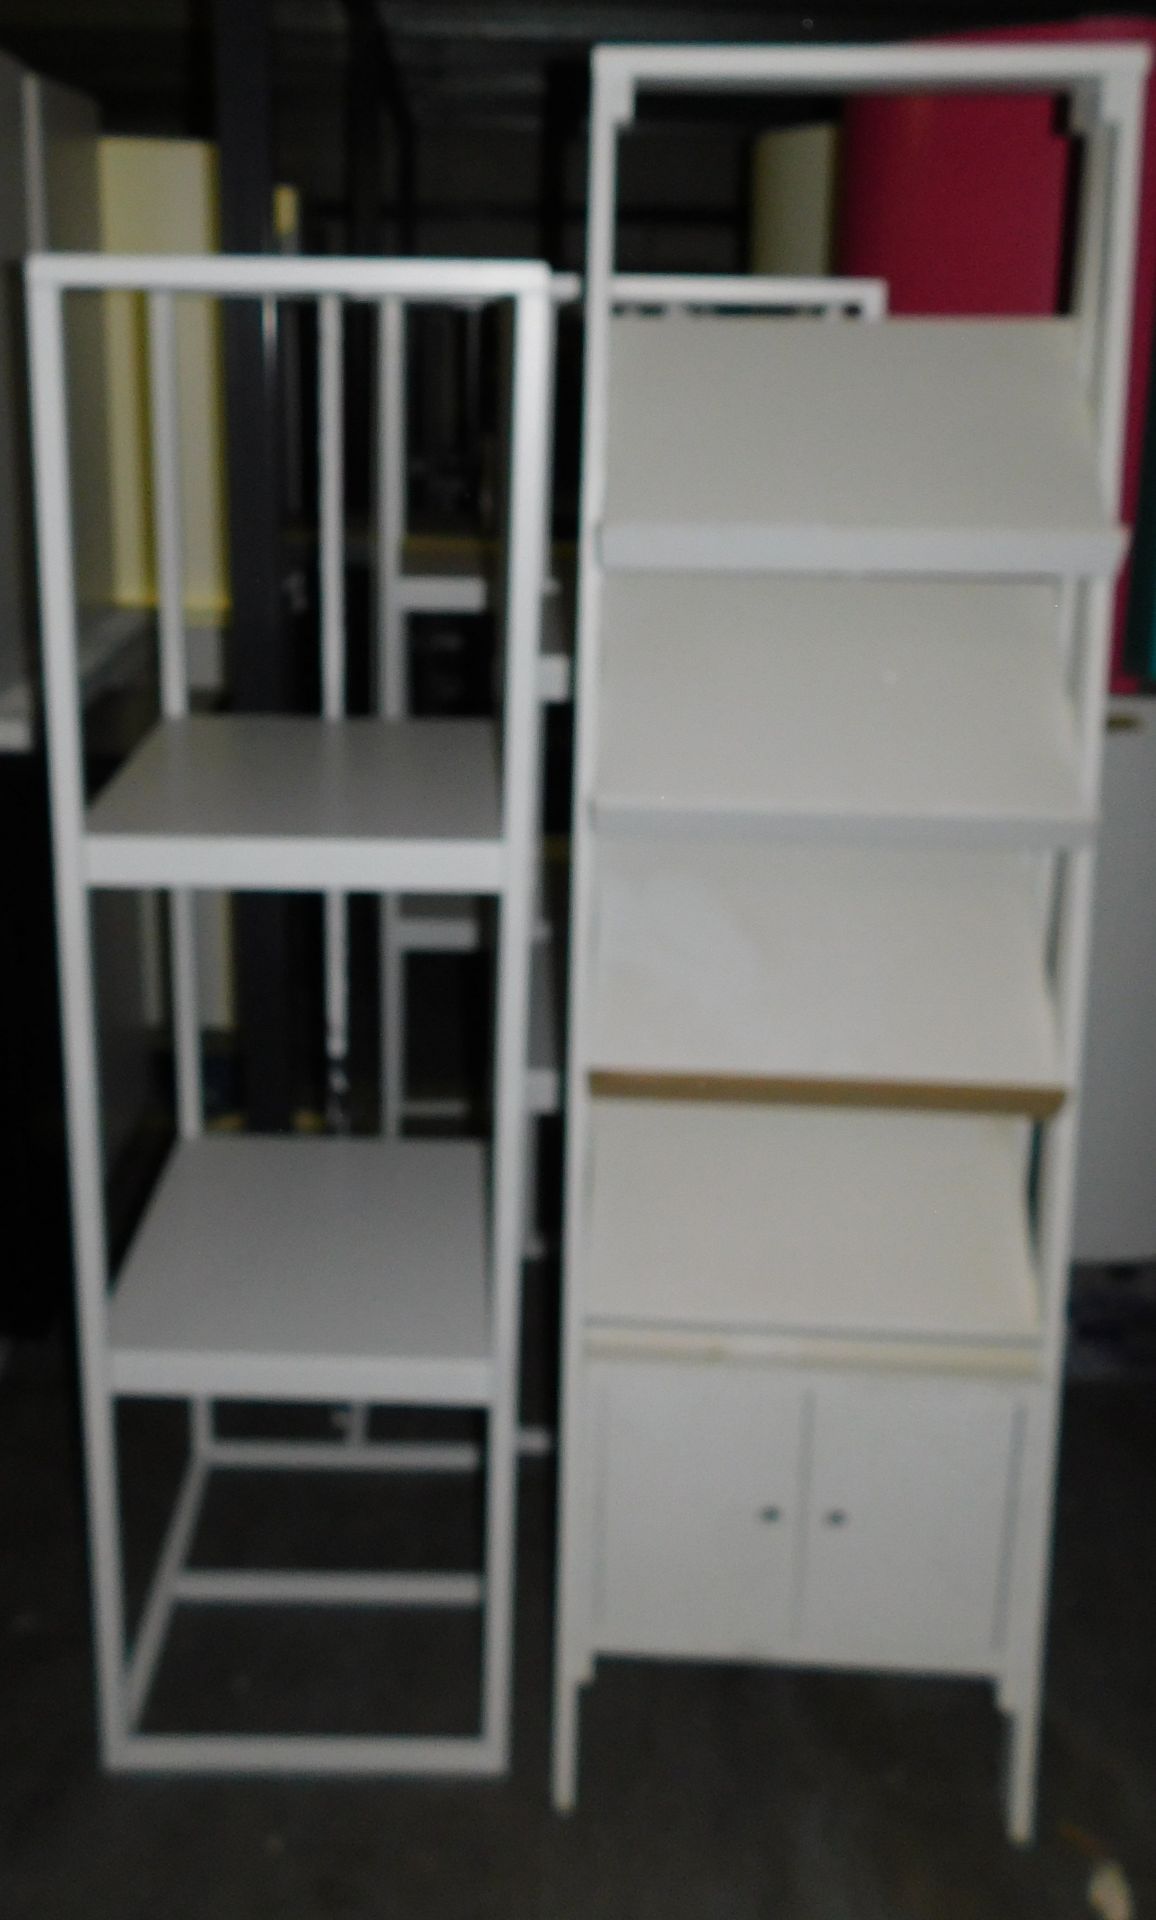 9 Shelving Units & Magazine Stand (Located Huntingdon, See General Notes for More Details)